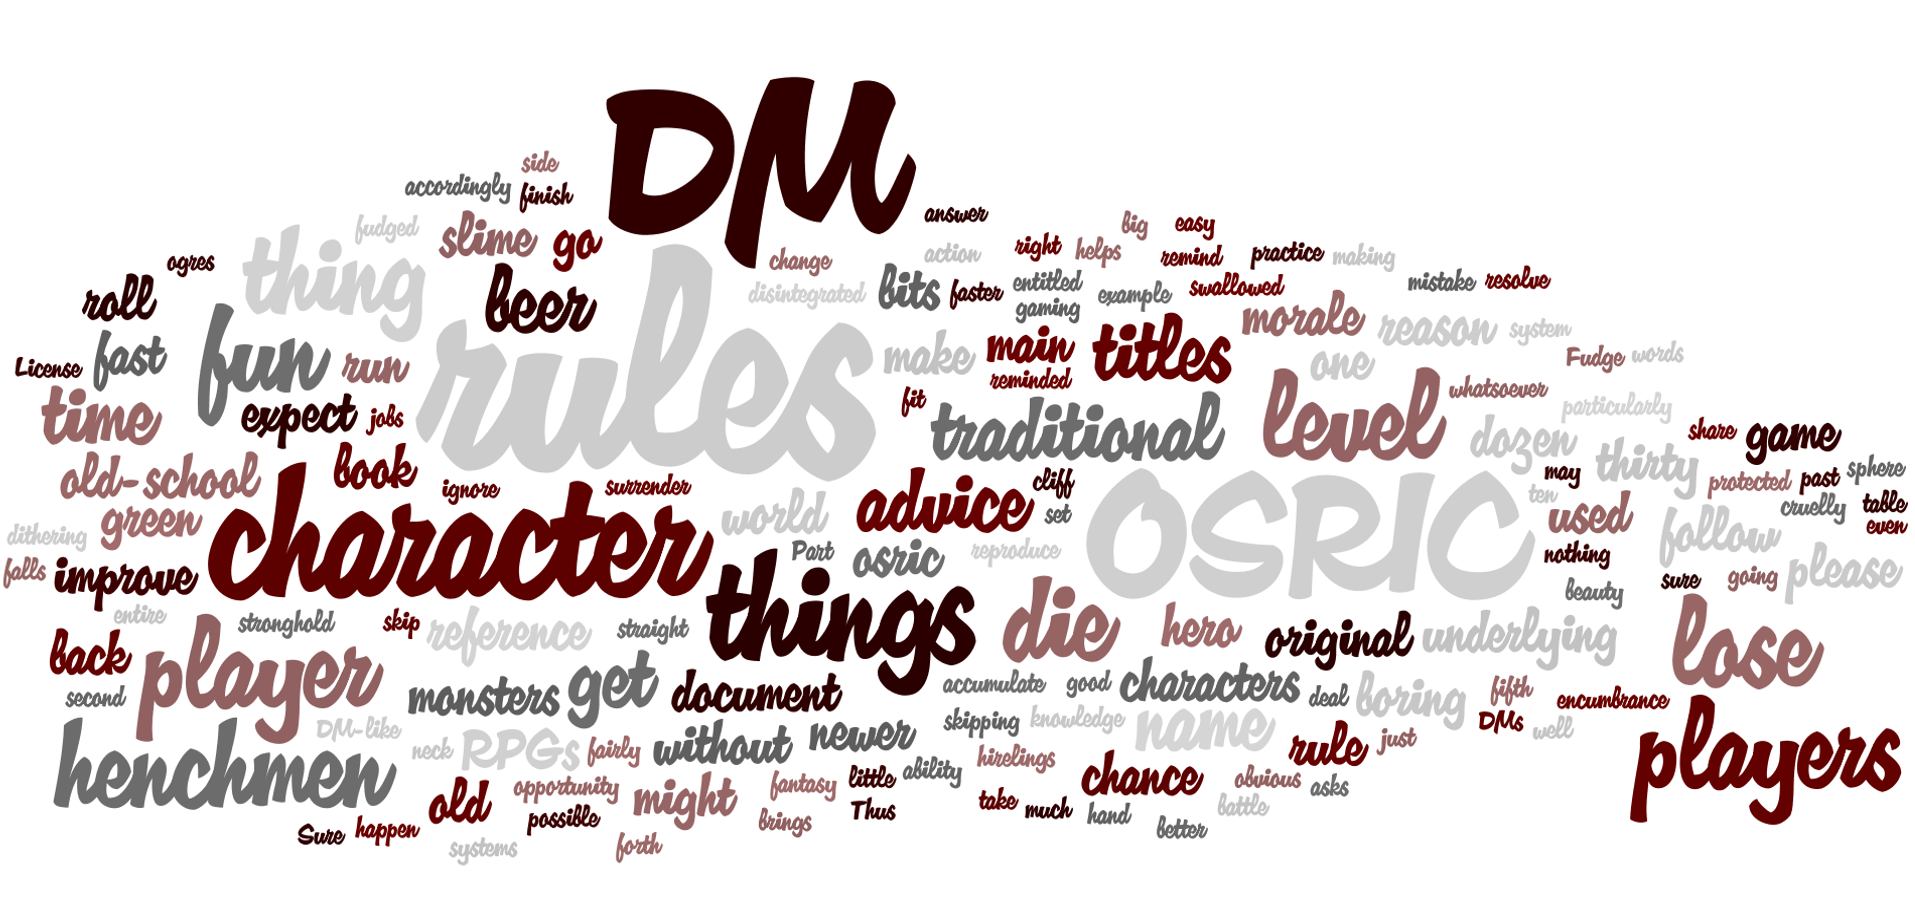 Wordle5.png  by rredmond